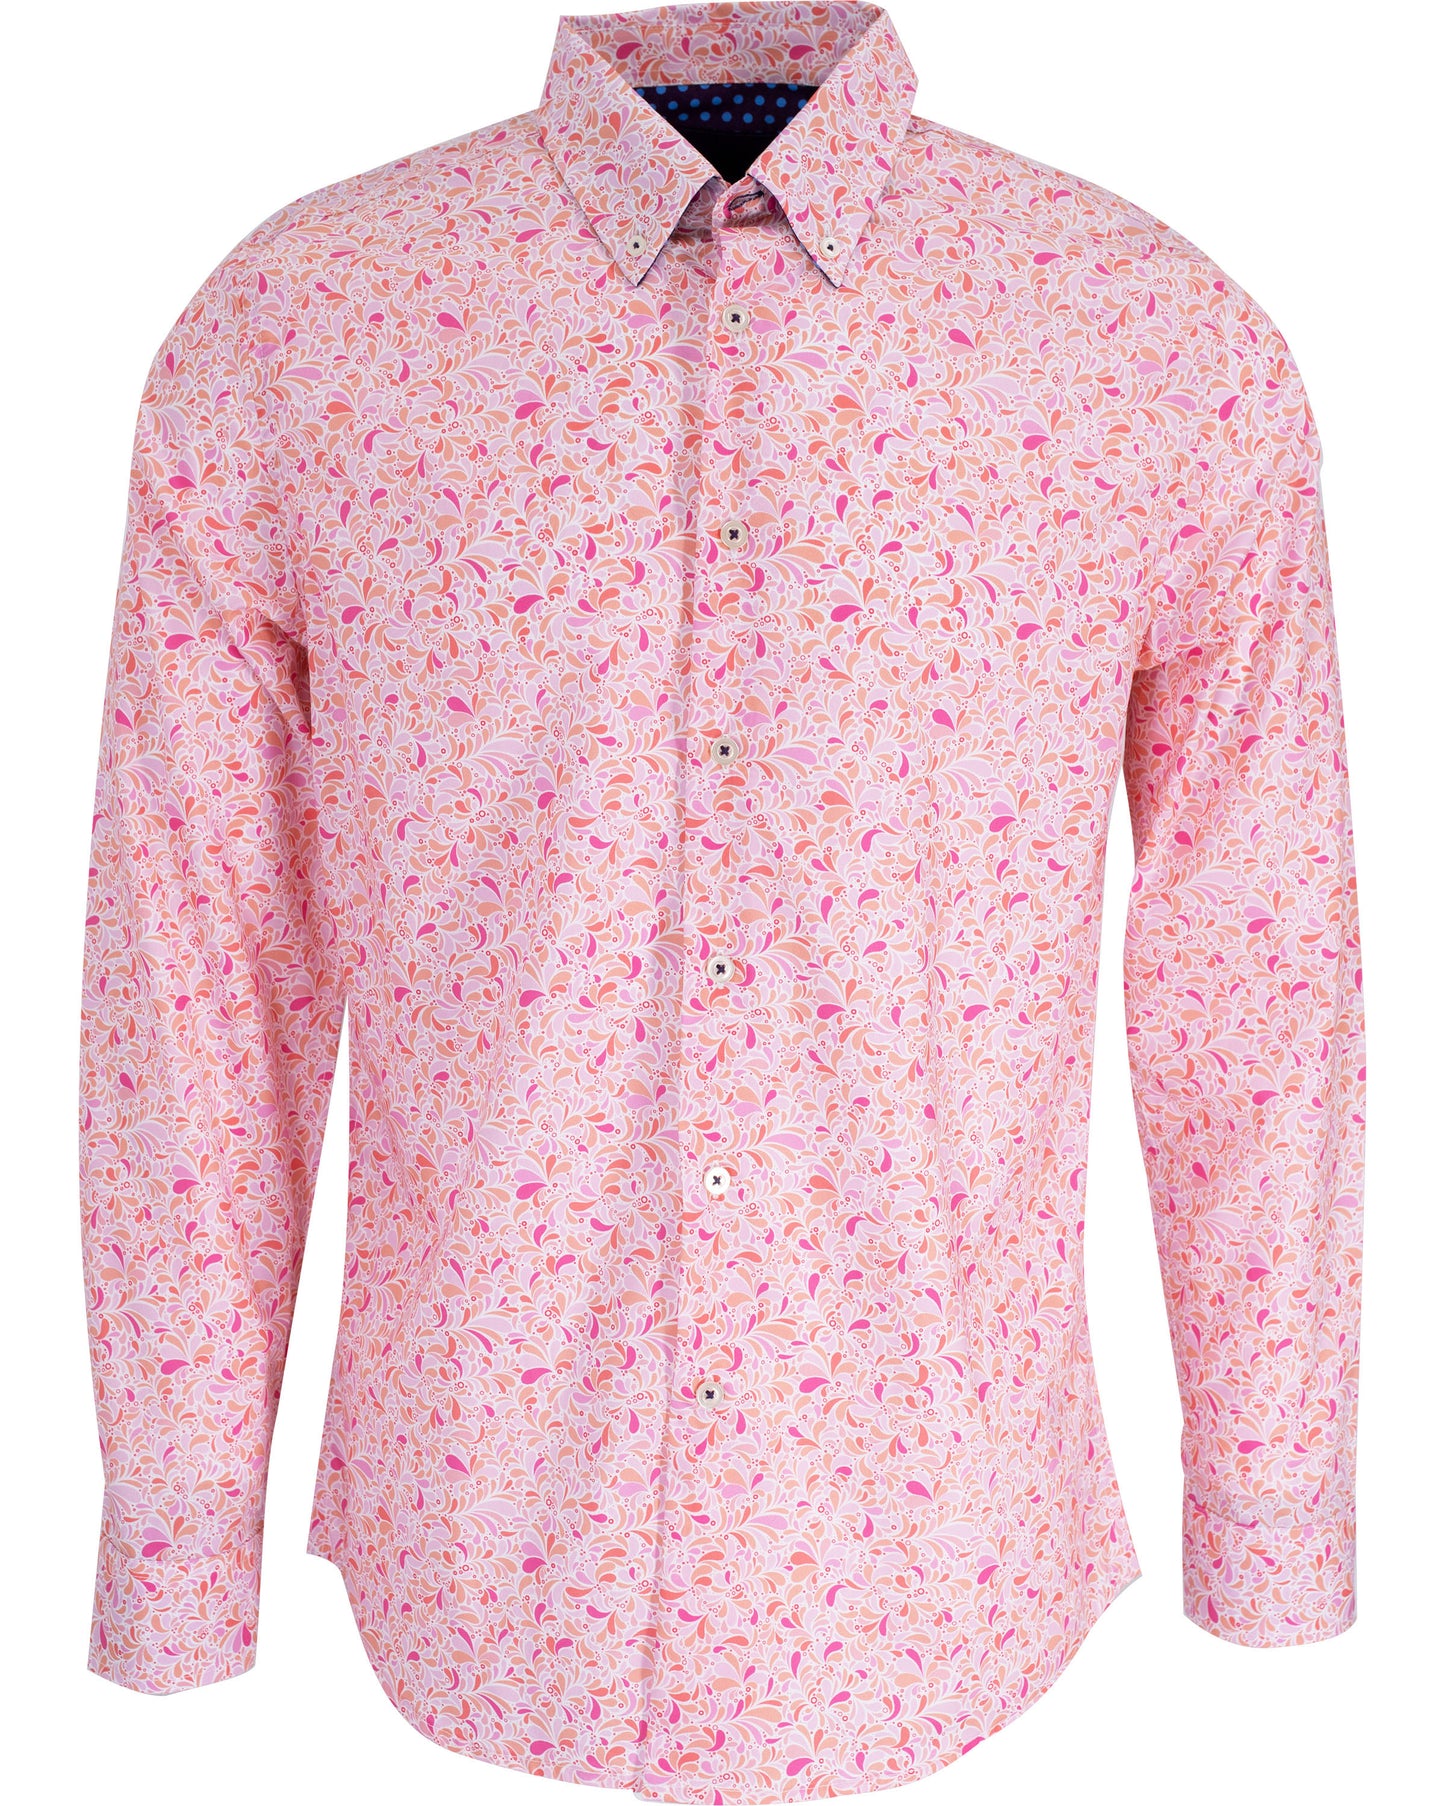 MITCHELL SMALL SWIRL SHIRT IN CANDY